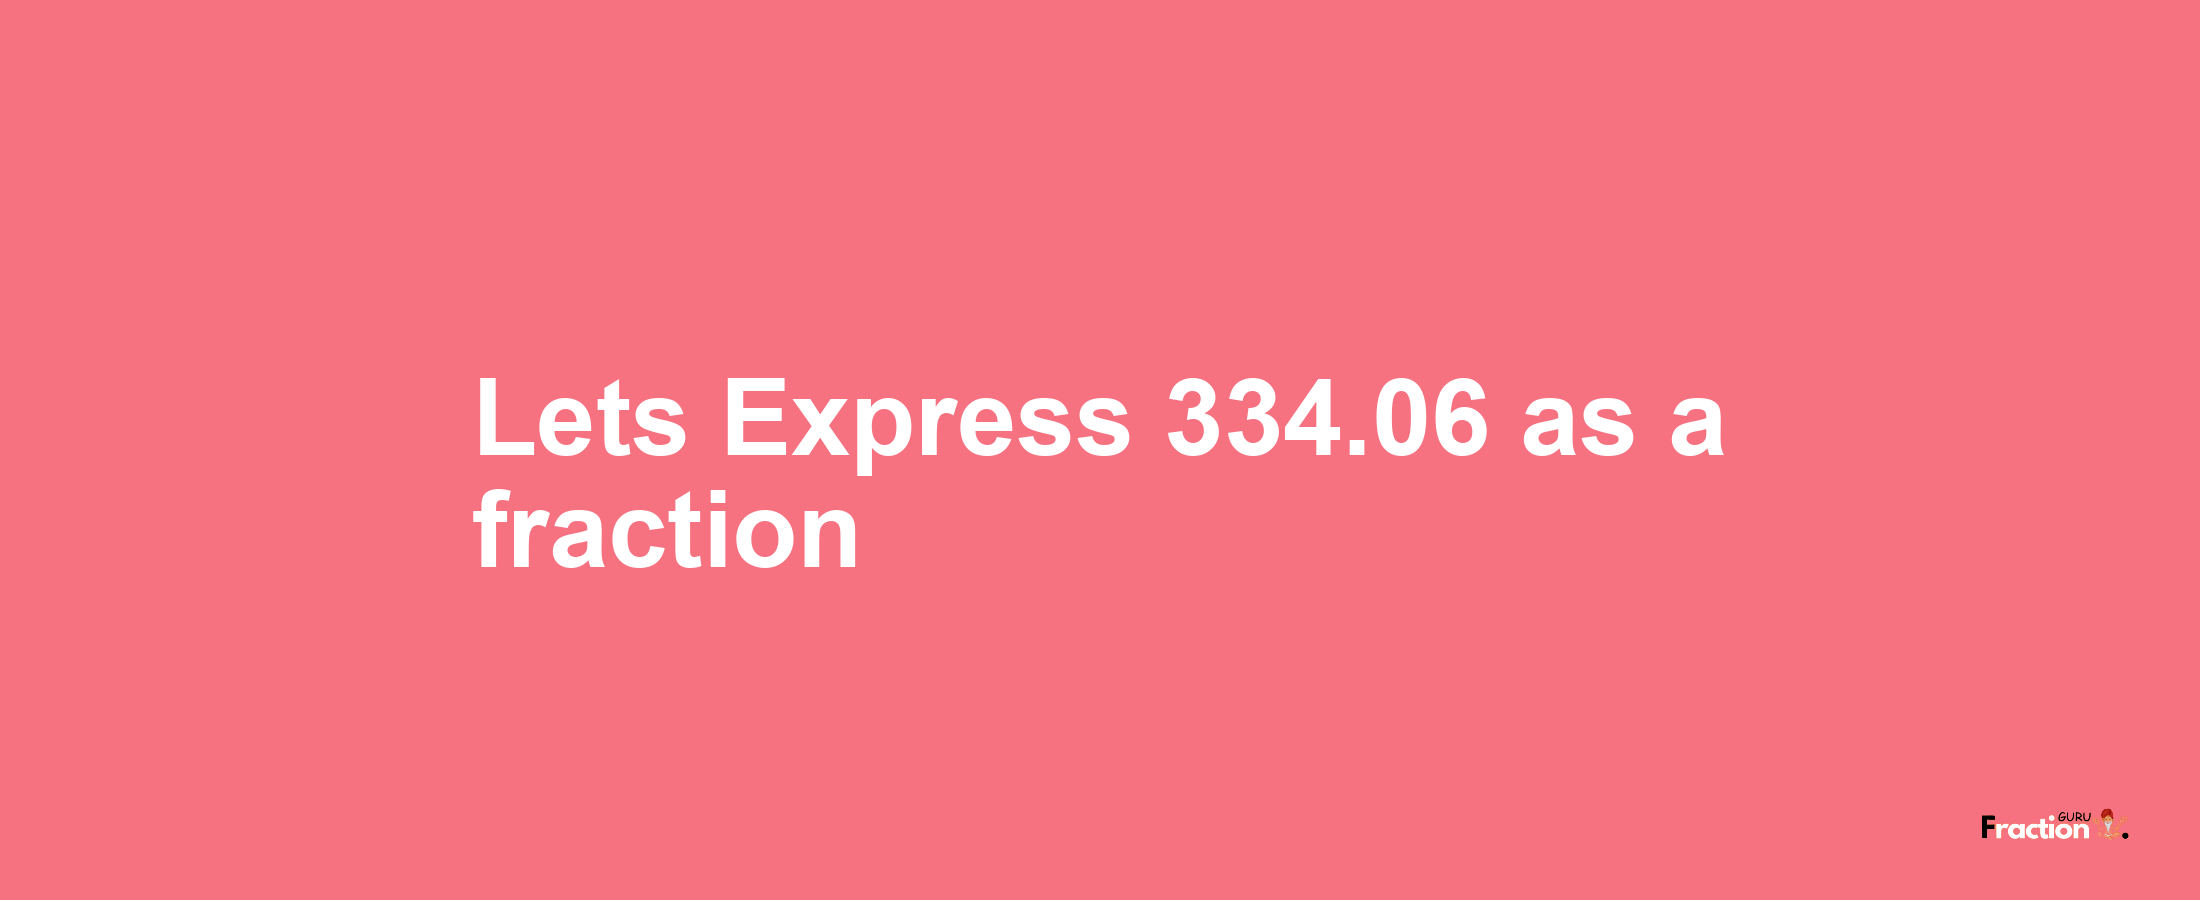 Lets Express 334.06 as afraction